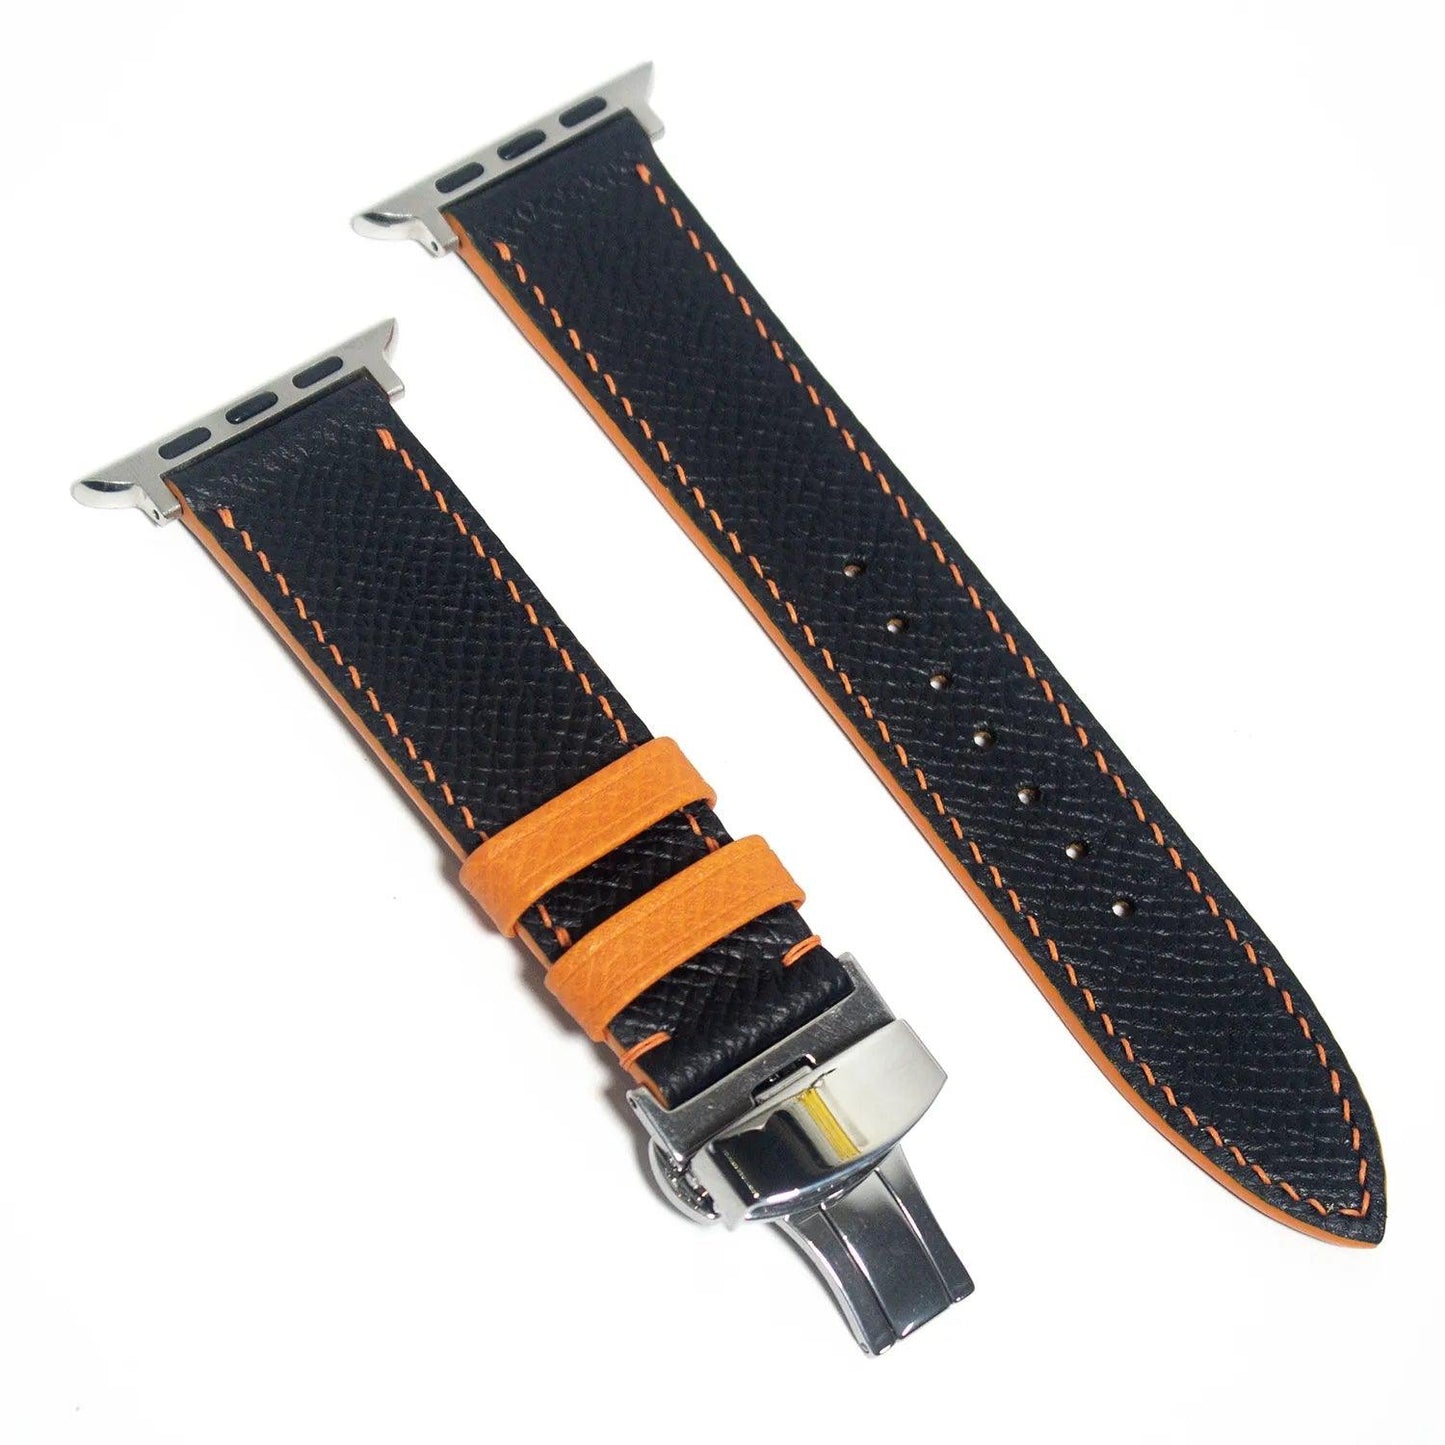 Chic leather Apple Watch band in black Epsom leather with eye-catching orange stitching, perfect for stylish tech enthusiasts.